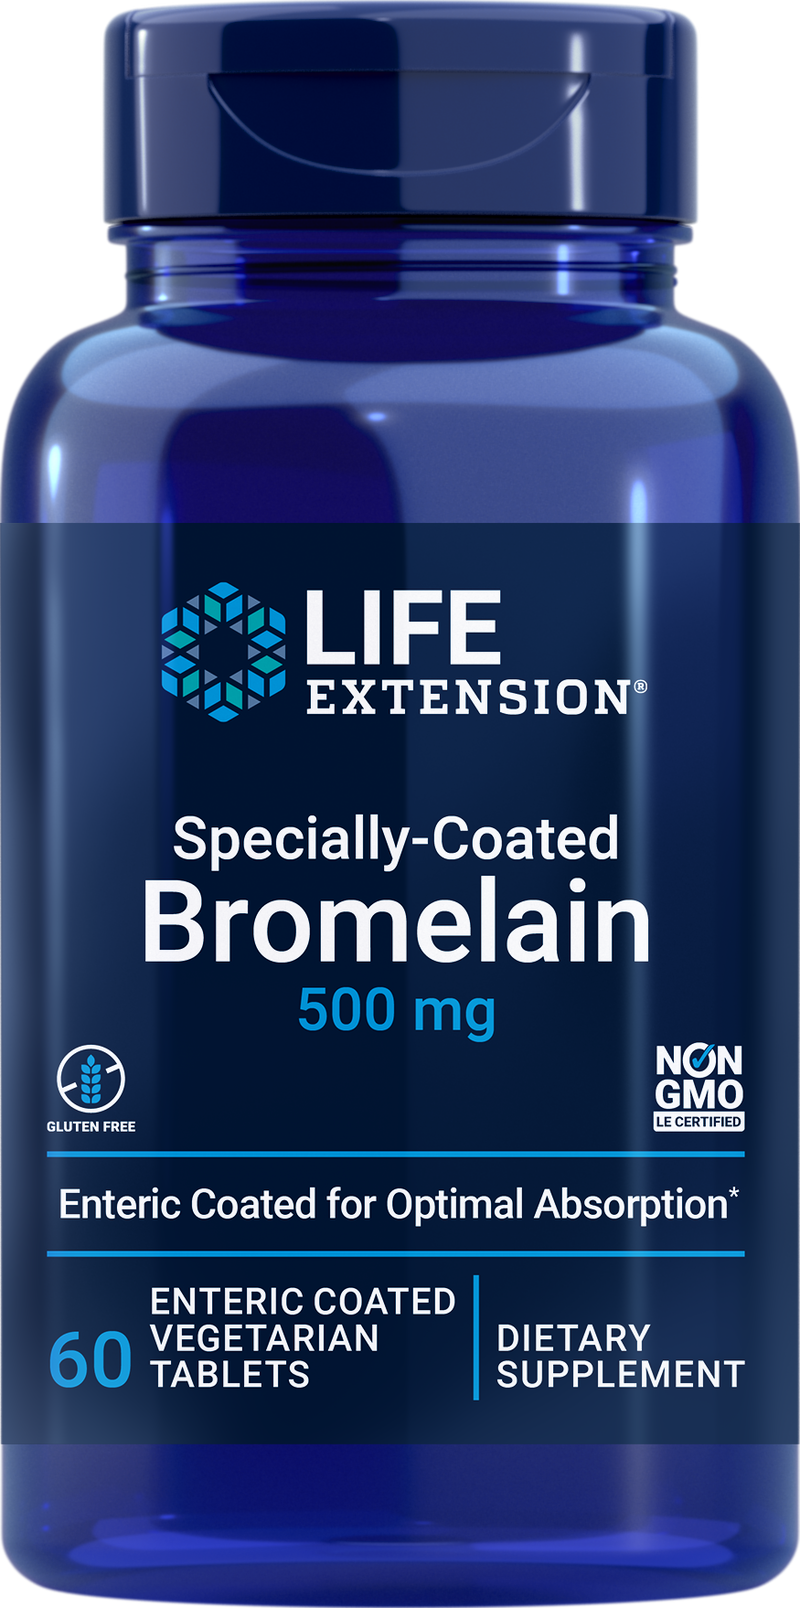 Specially-Coated Bromelain 500 mg, 60 enteric-coated veg tabs by Life Extension